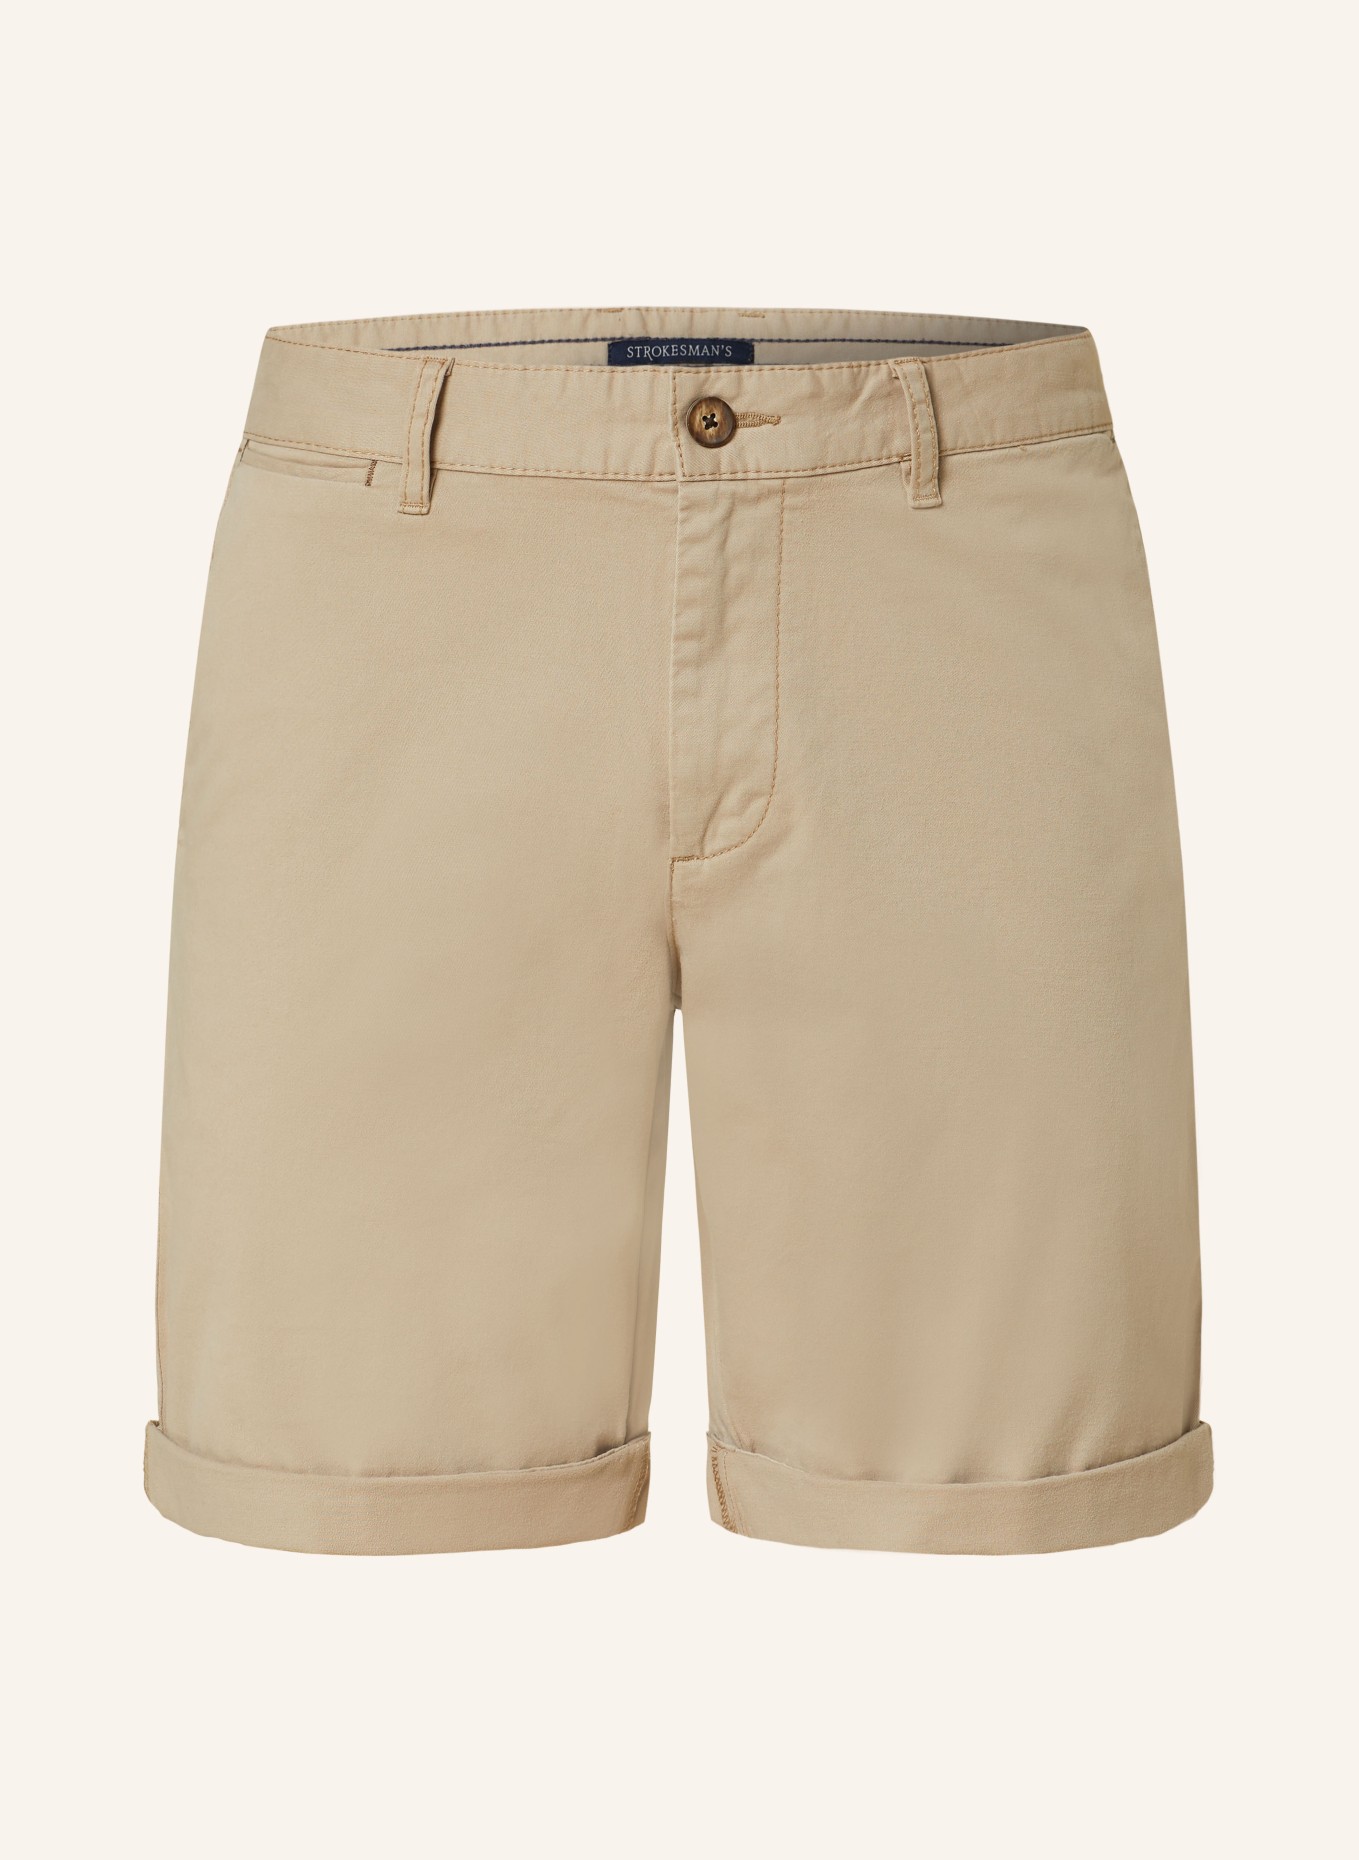 STROKESMAN'S Chinos shorts slim fit, Color: BEIGE (Image 1)